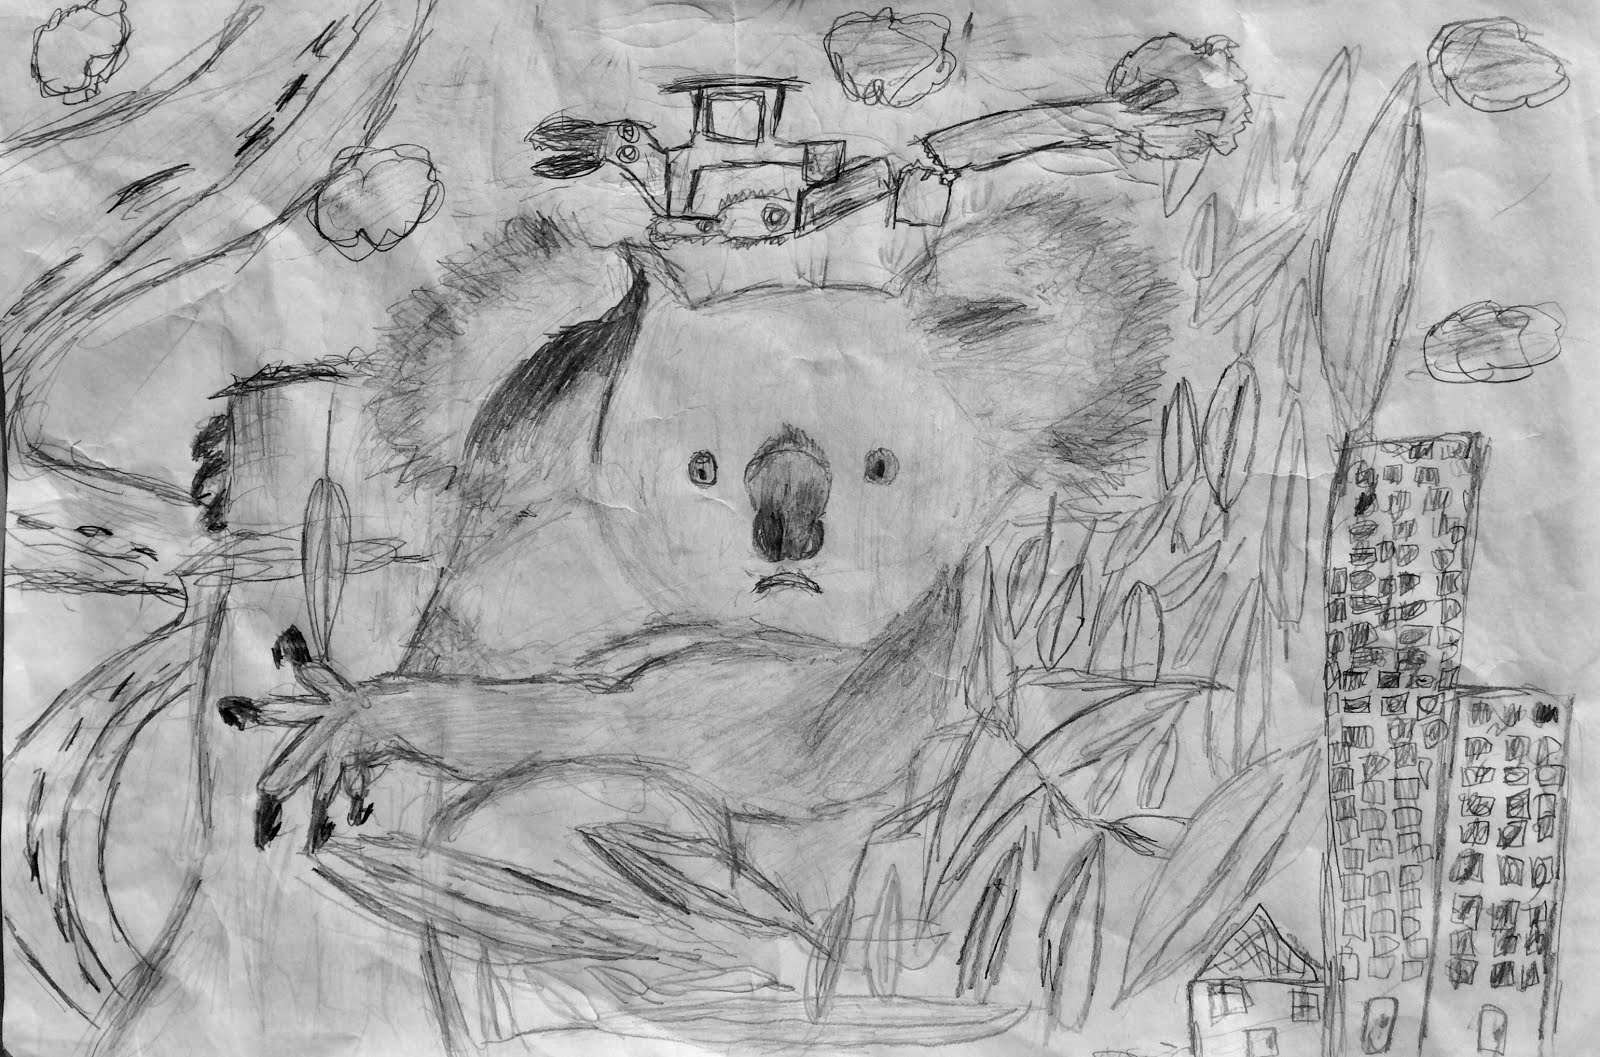 THREATENED SPECIES ART COMPETITION